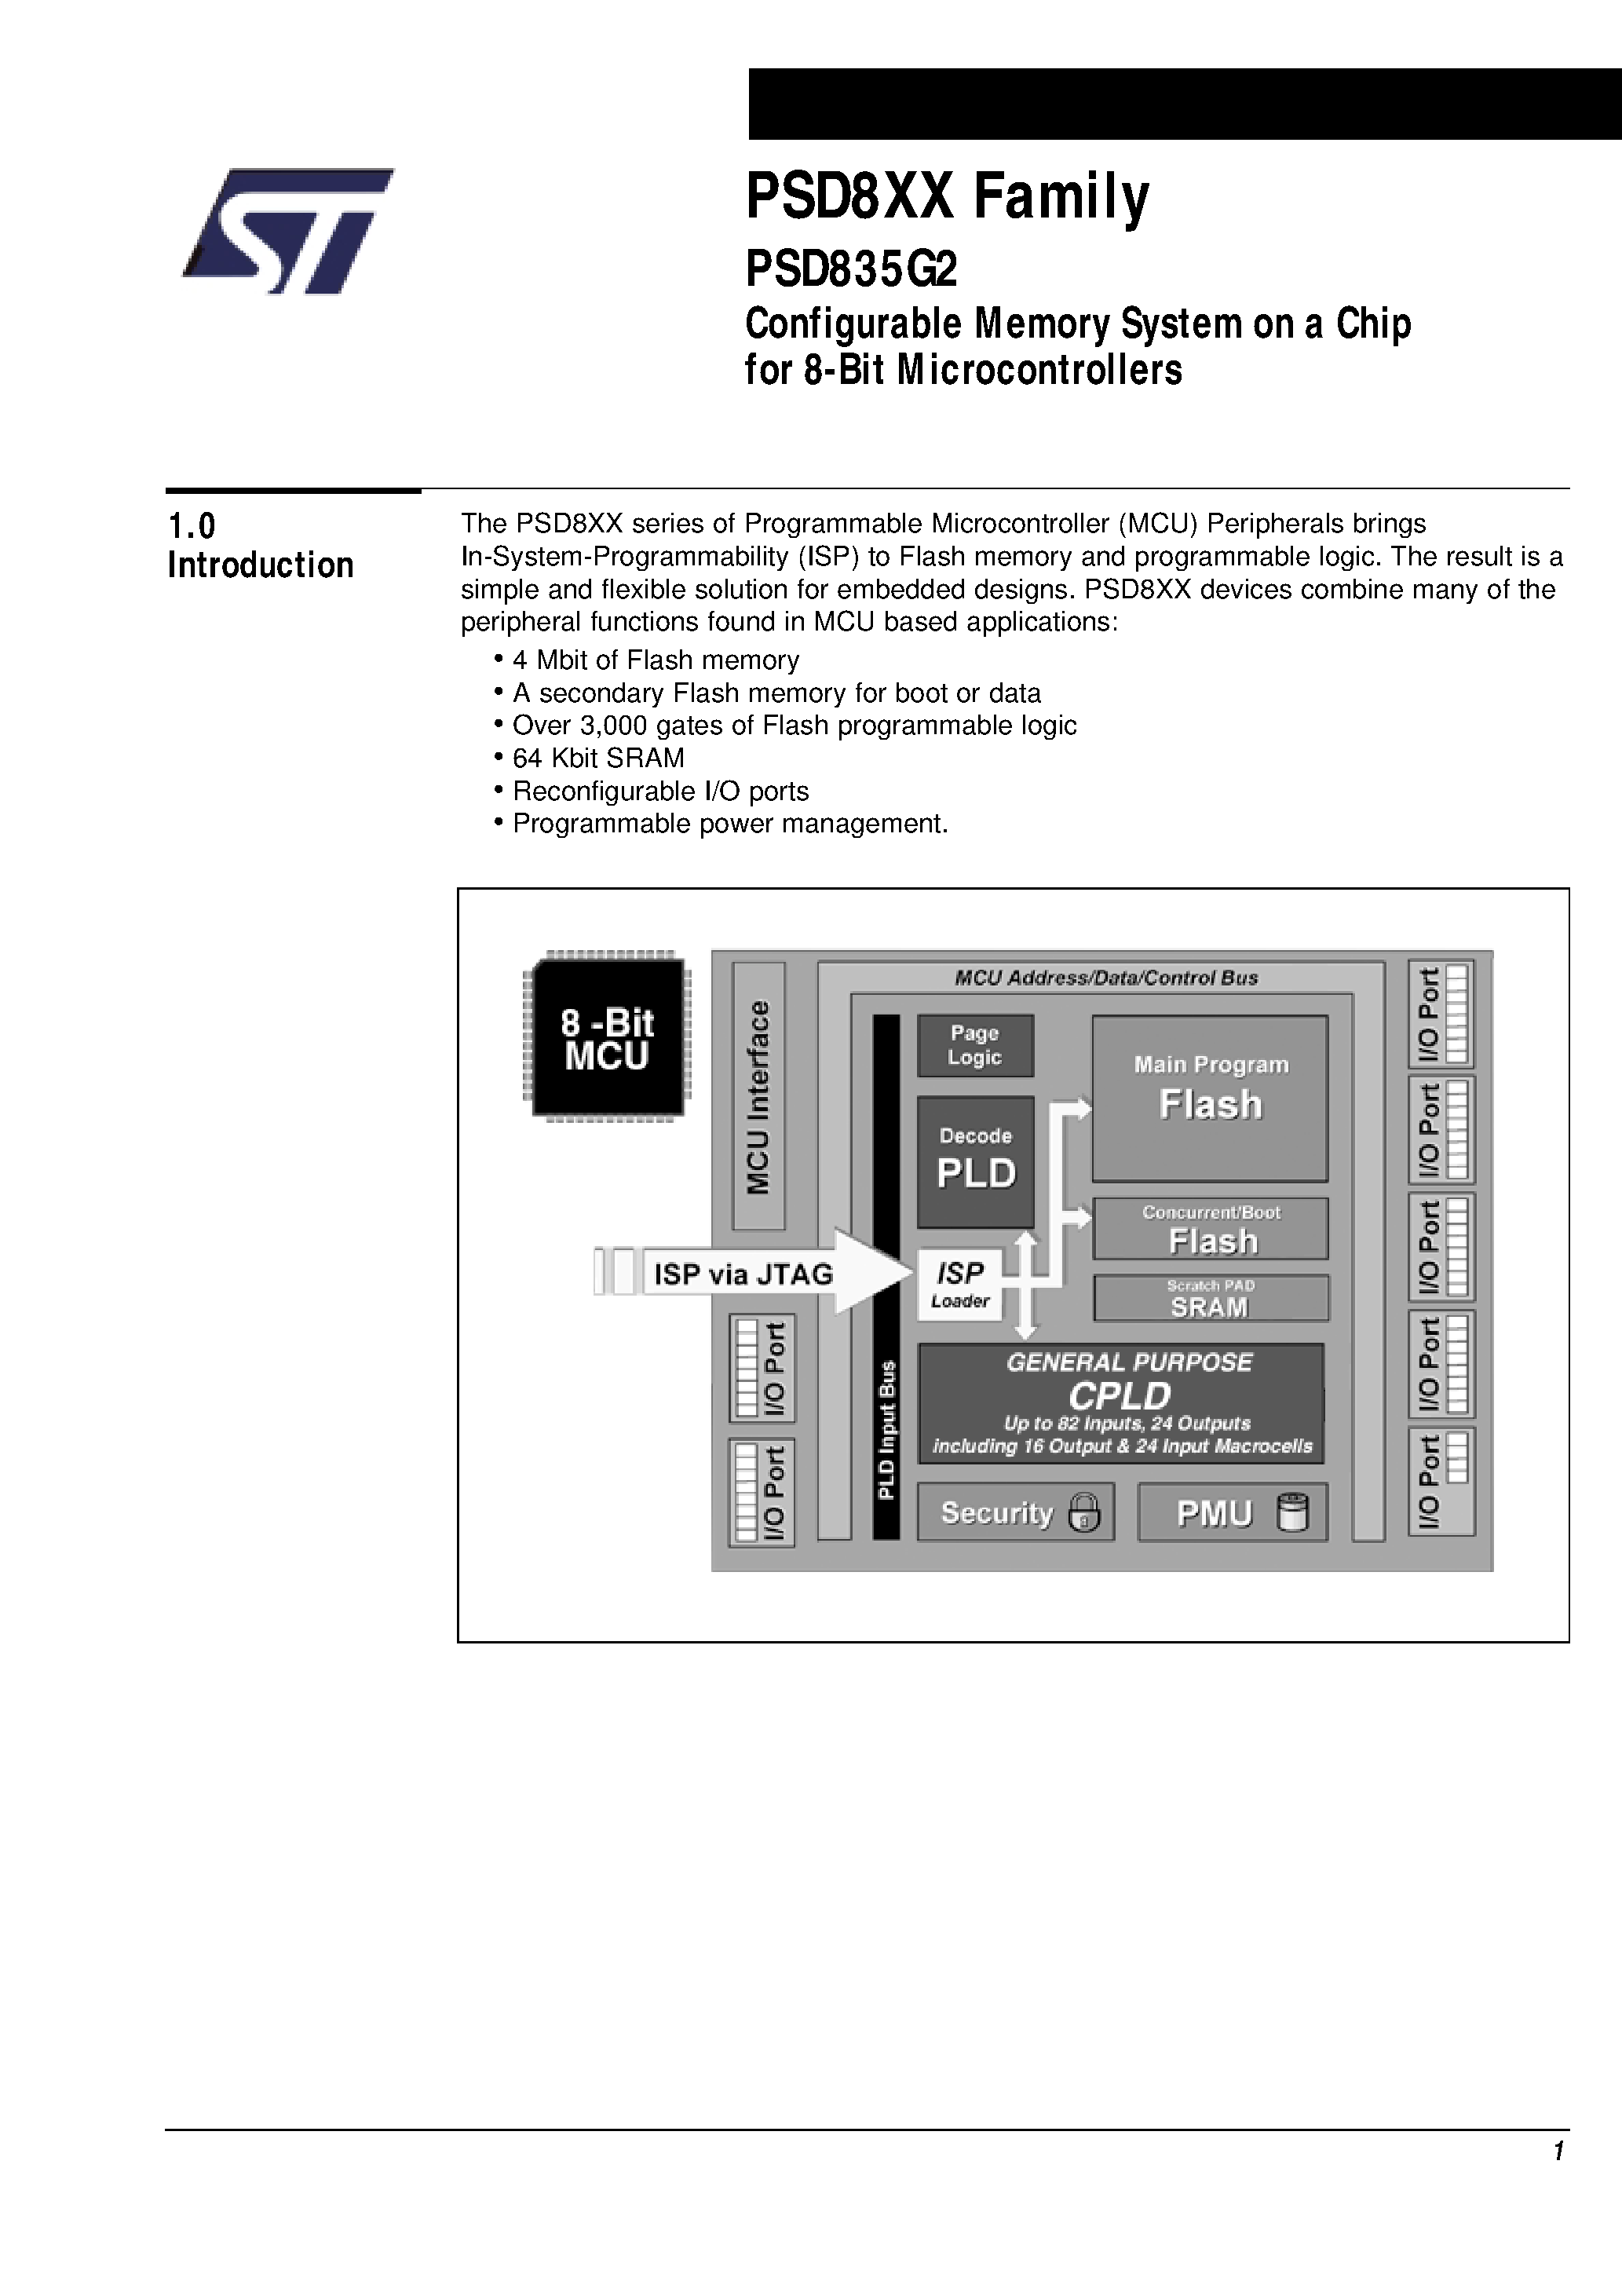 Datasheet PSD835F2-A-20MI - Configurable Memory System on a Chip for 8-Bit Microcontrollers page 2